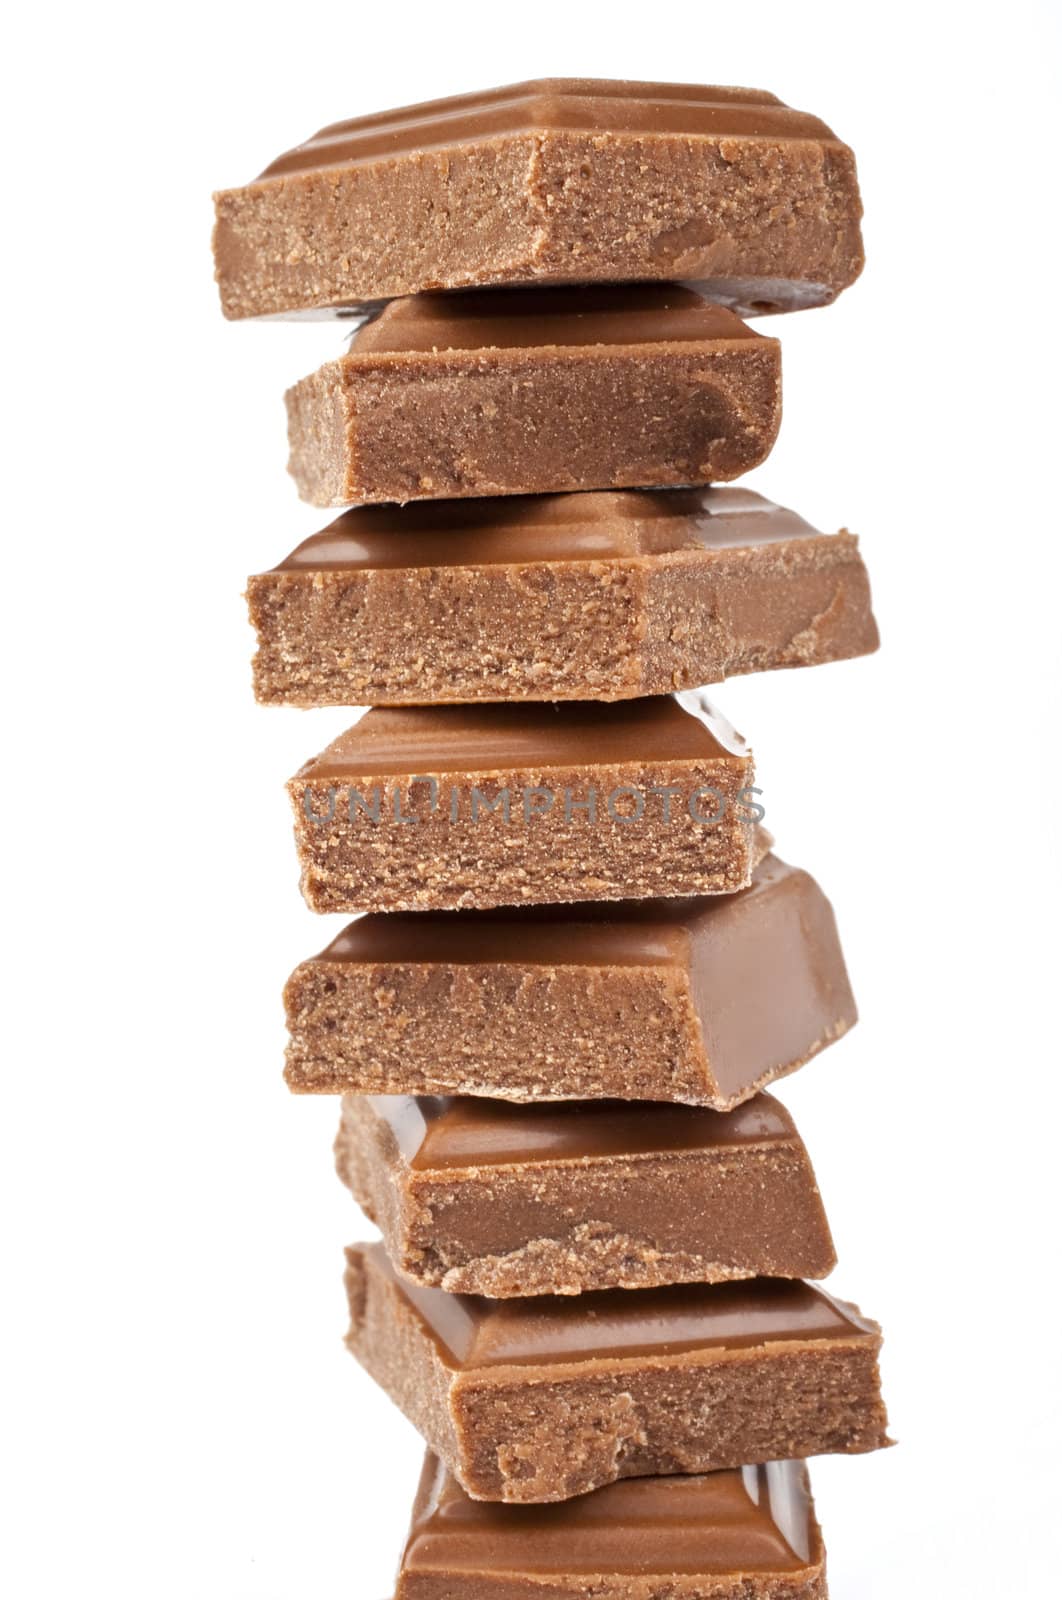 Chunks of Chocolate piled up in front of a white background.